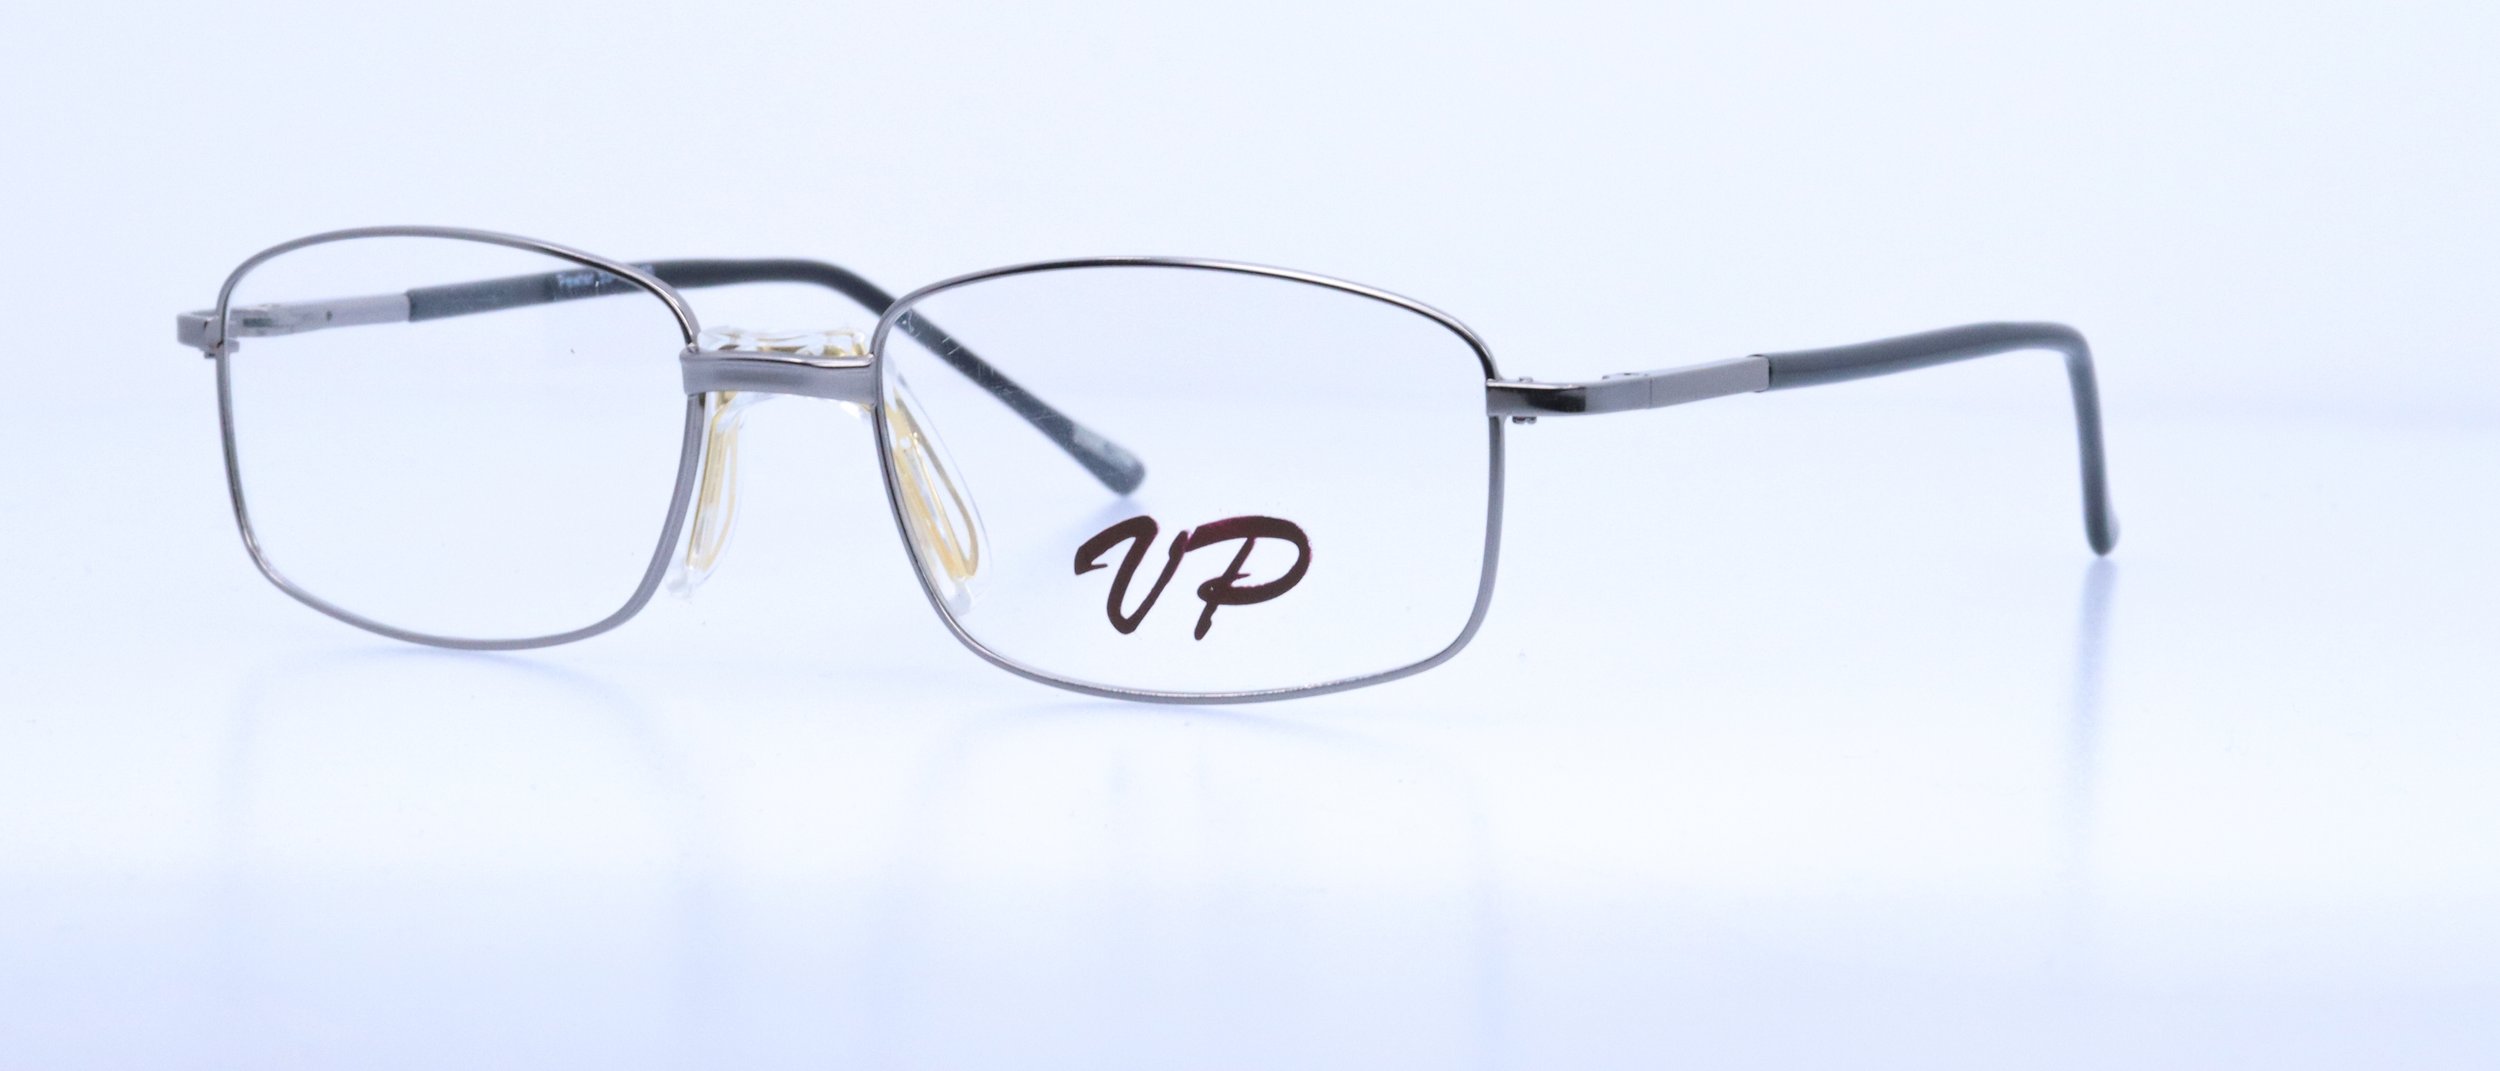  VP153: 53-18-140, Available in Pewter, Brown, or Gold 